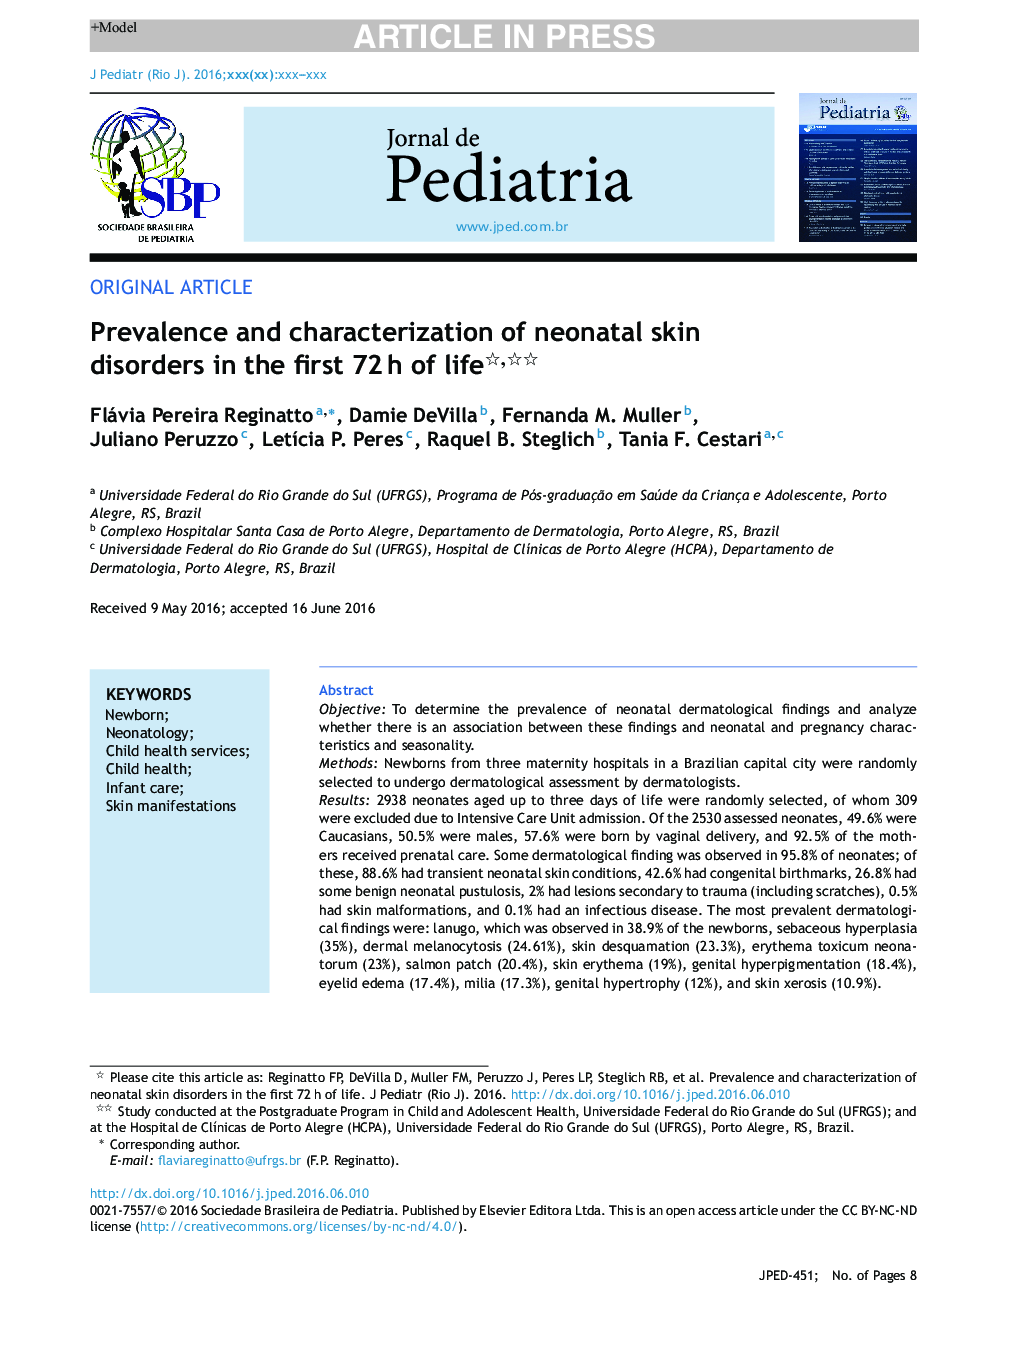 Prevalence and characterization of neonatal skin disorders in the first 72Â h of life